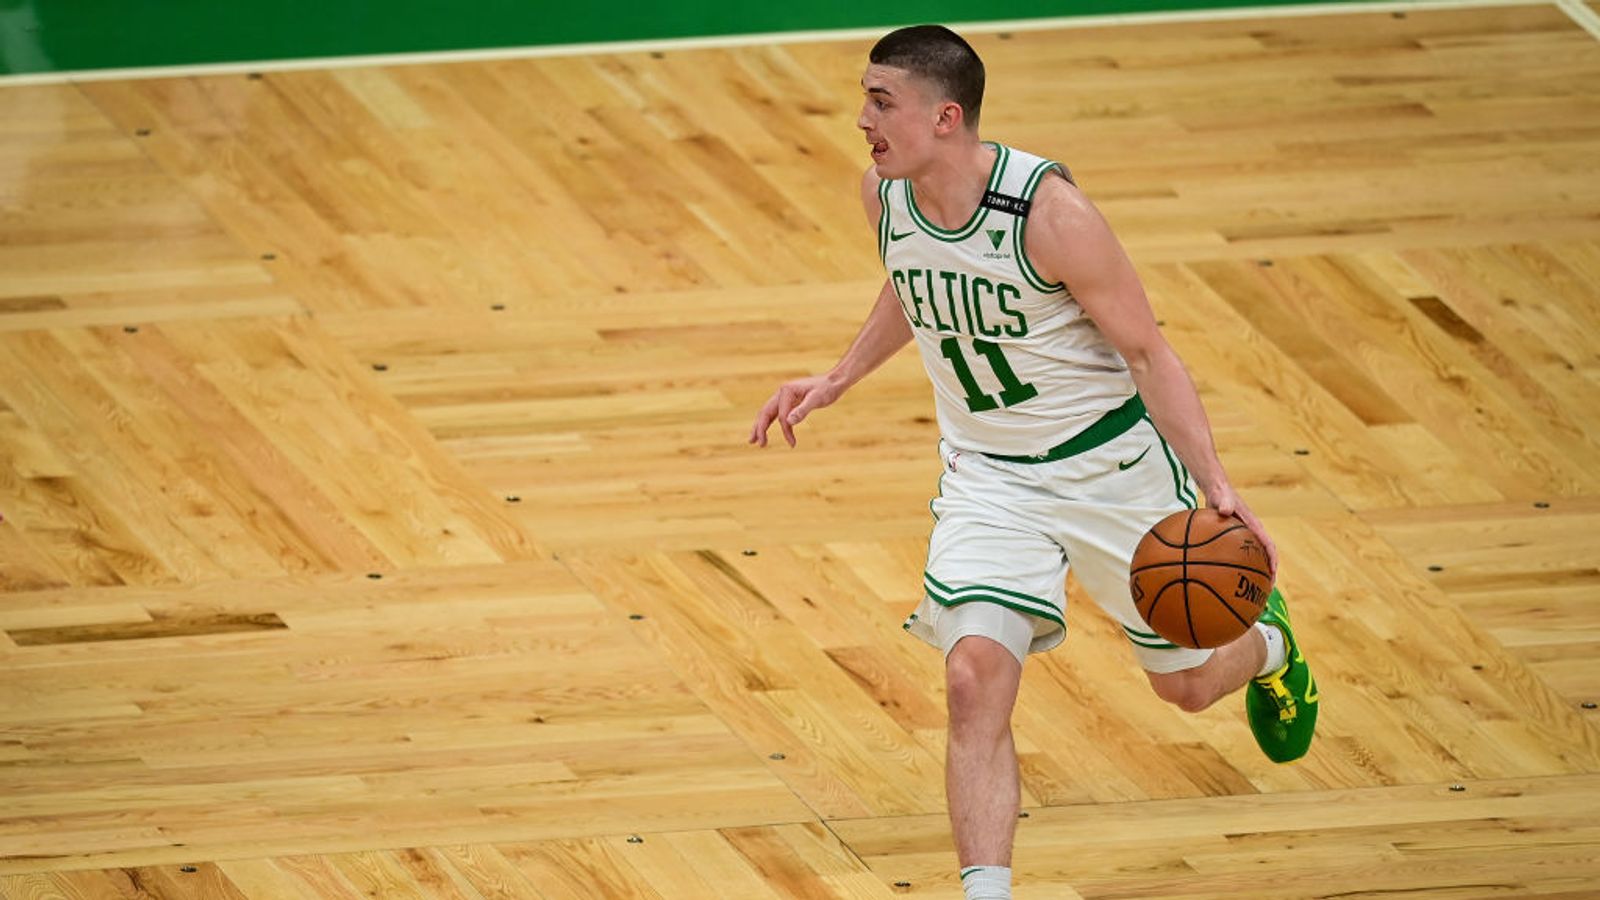 Celtics rookie Payton Pritchard plays crucial role in Boston's